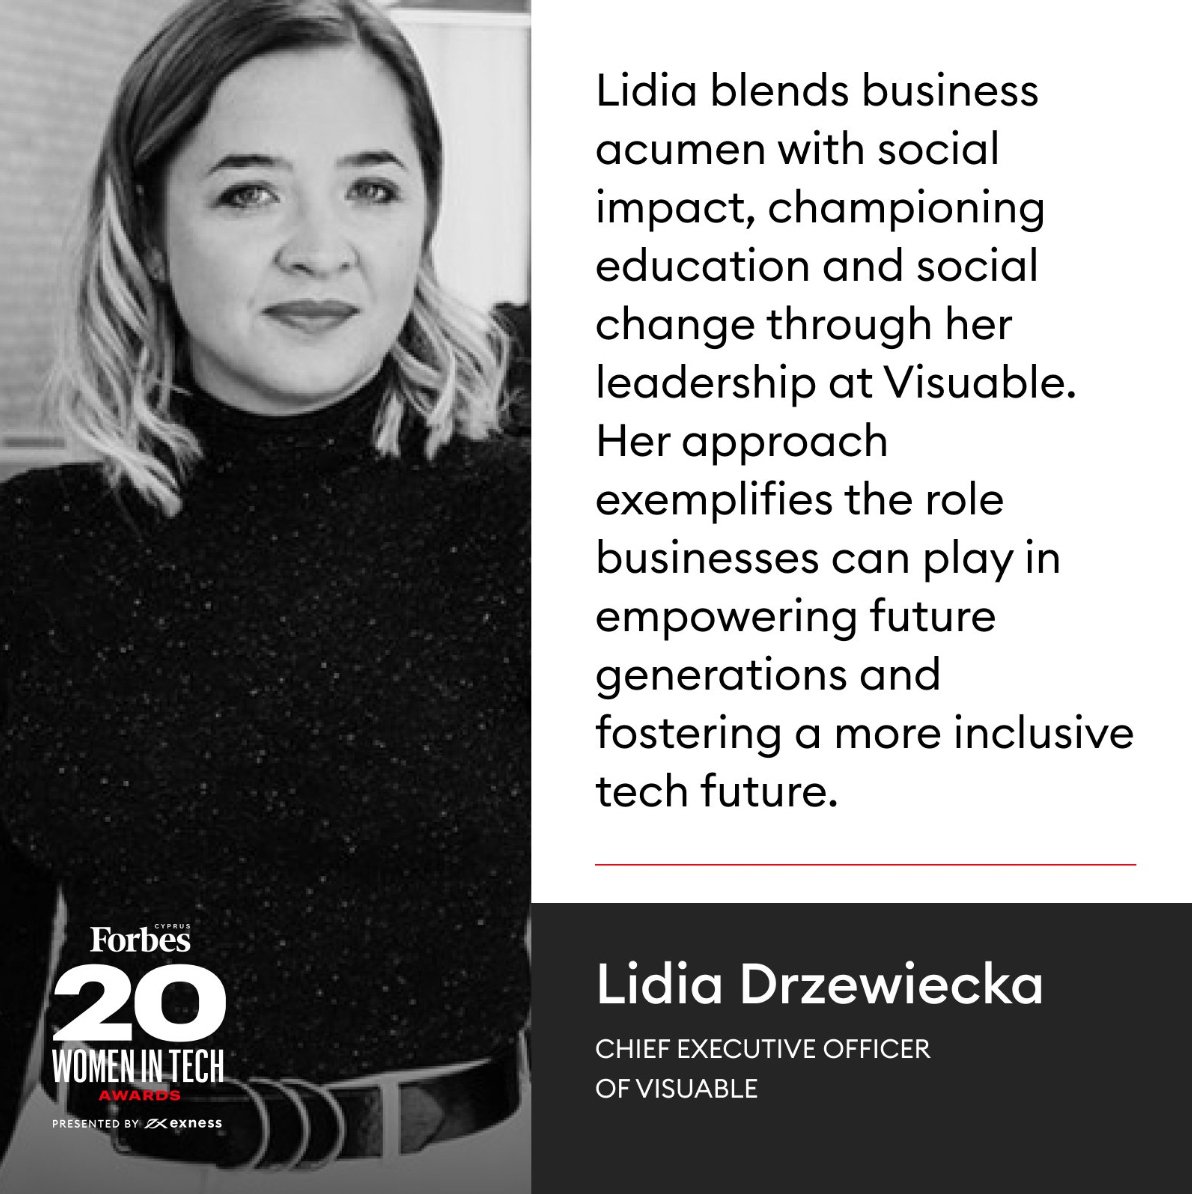  Forbes Cyprus 20 Women in Tech’s Instagram post about Lidia 